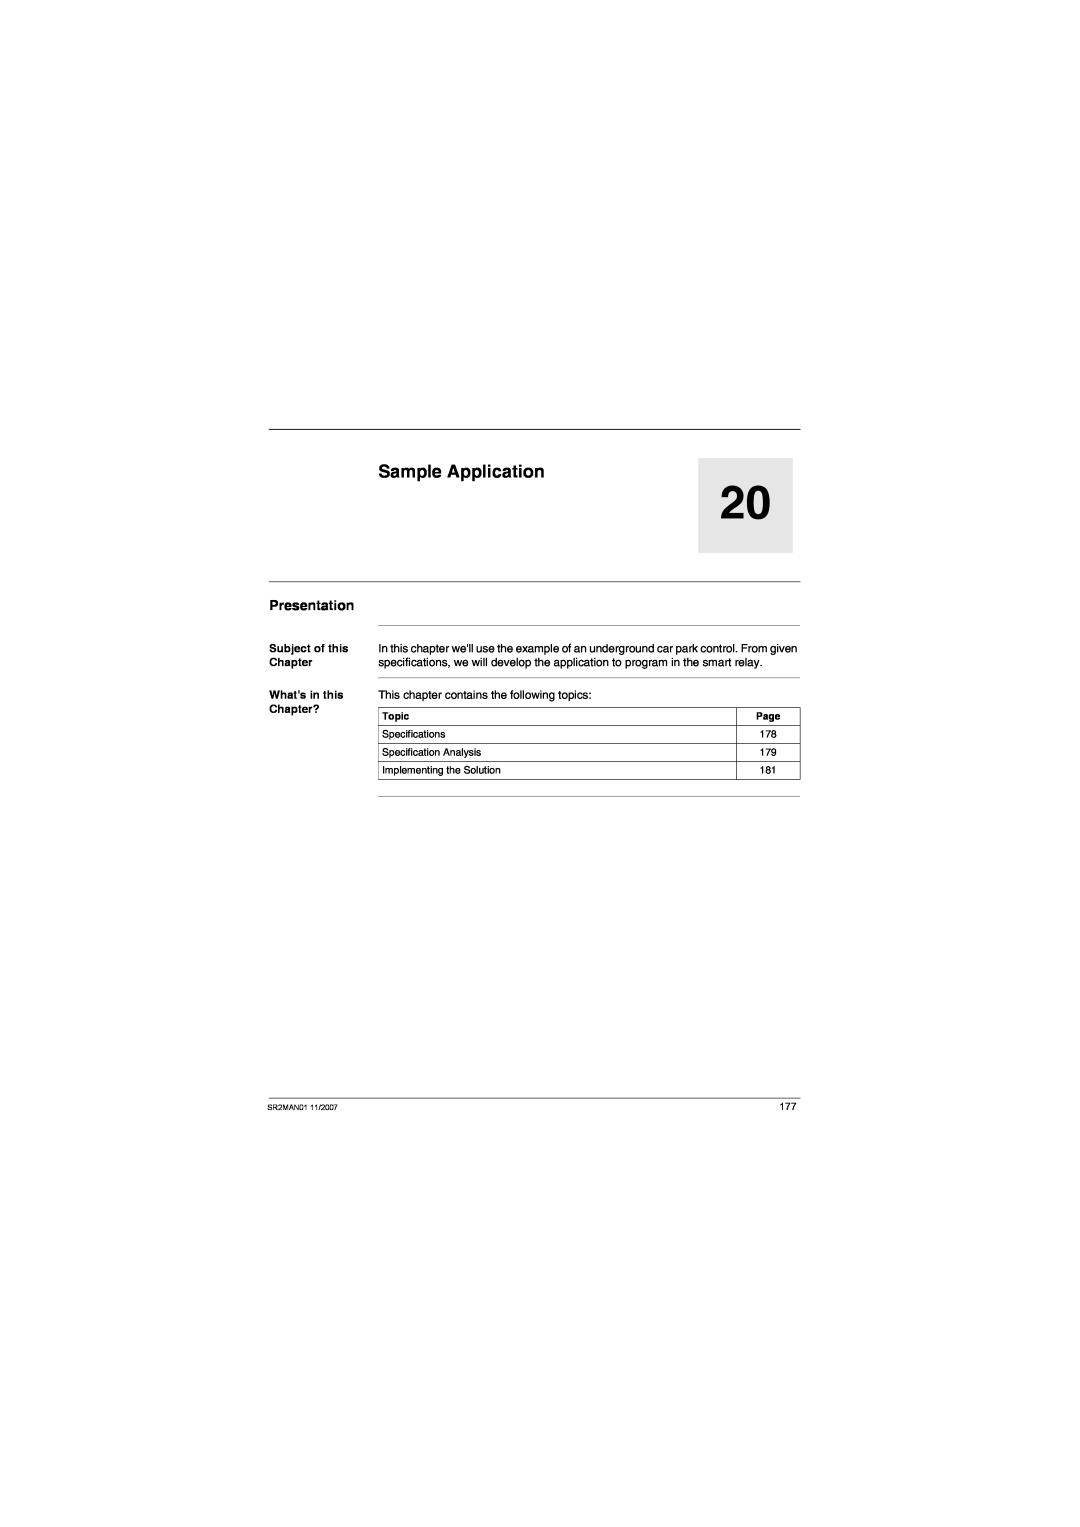 Schneider Electric SR2MAN01 Sample Application, Presentation, Subject of this Chapter Whats in this Chapter?, Topic, Page 